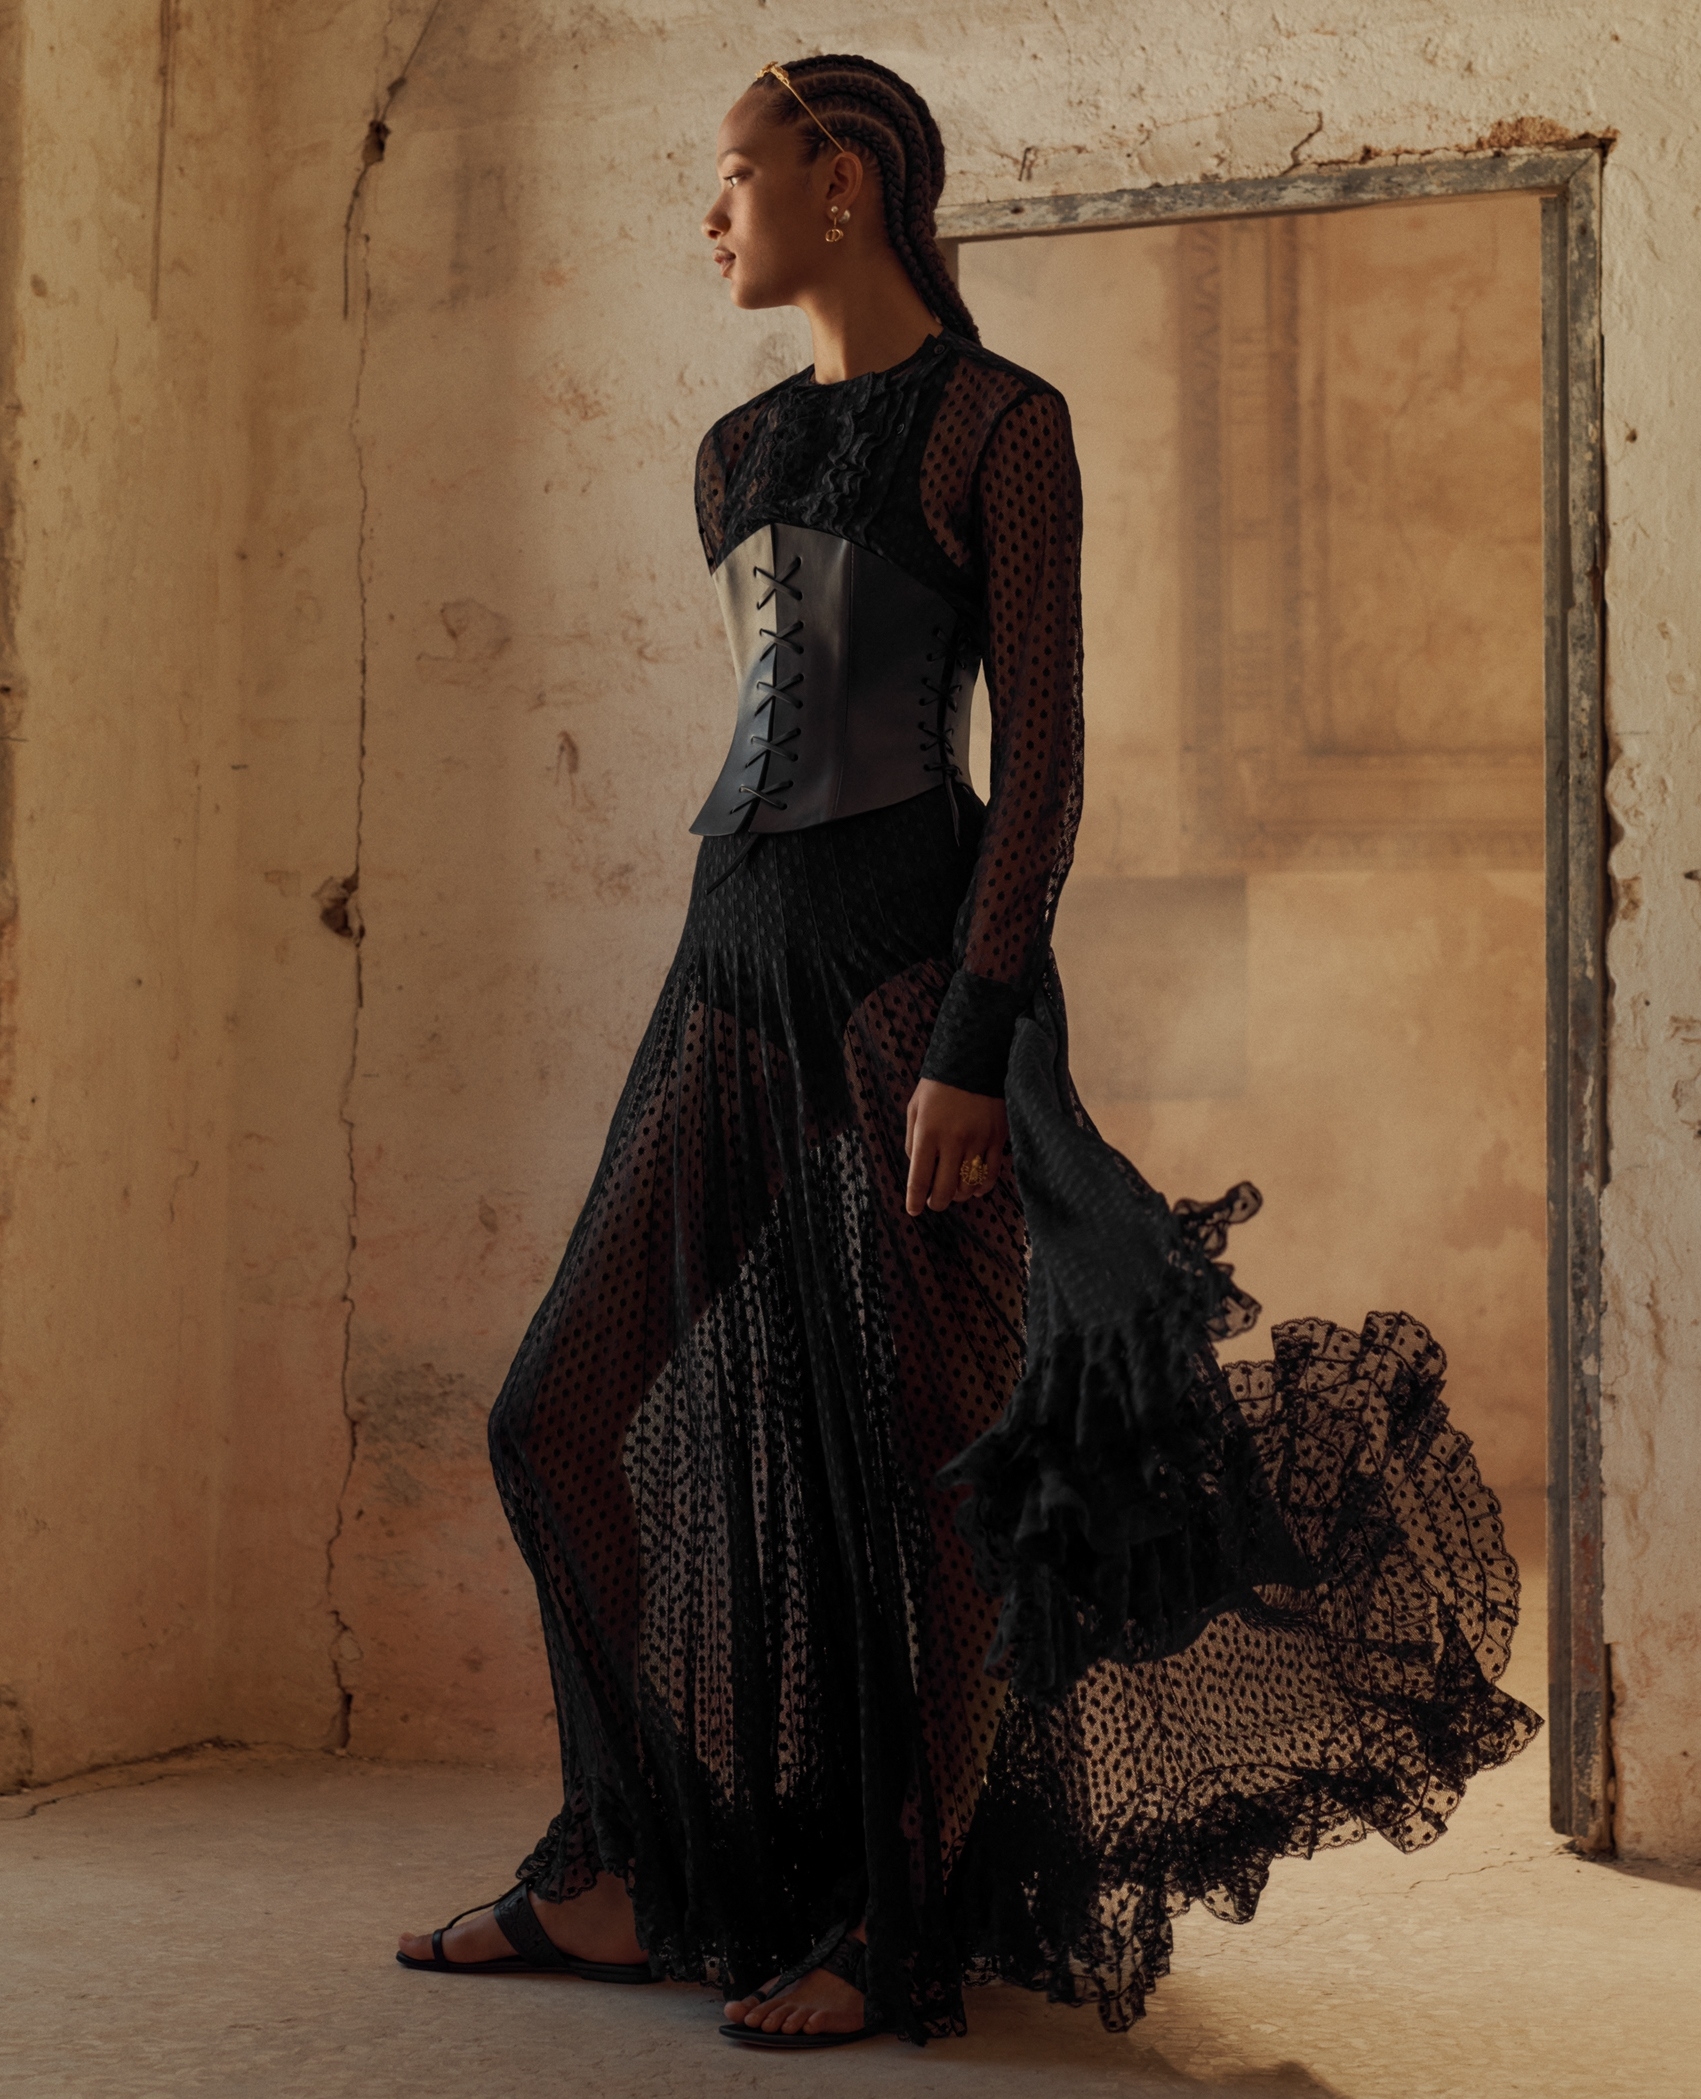 Dior on X: The hyper-feminine waist provided by the 'D-Lace' corset belt  is an essential element of #DiorCruise 2021  by  Maria Grazia Chiuri. Here, in black leather fastened at the low-cut